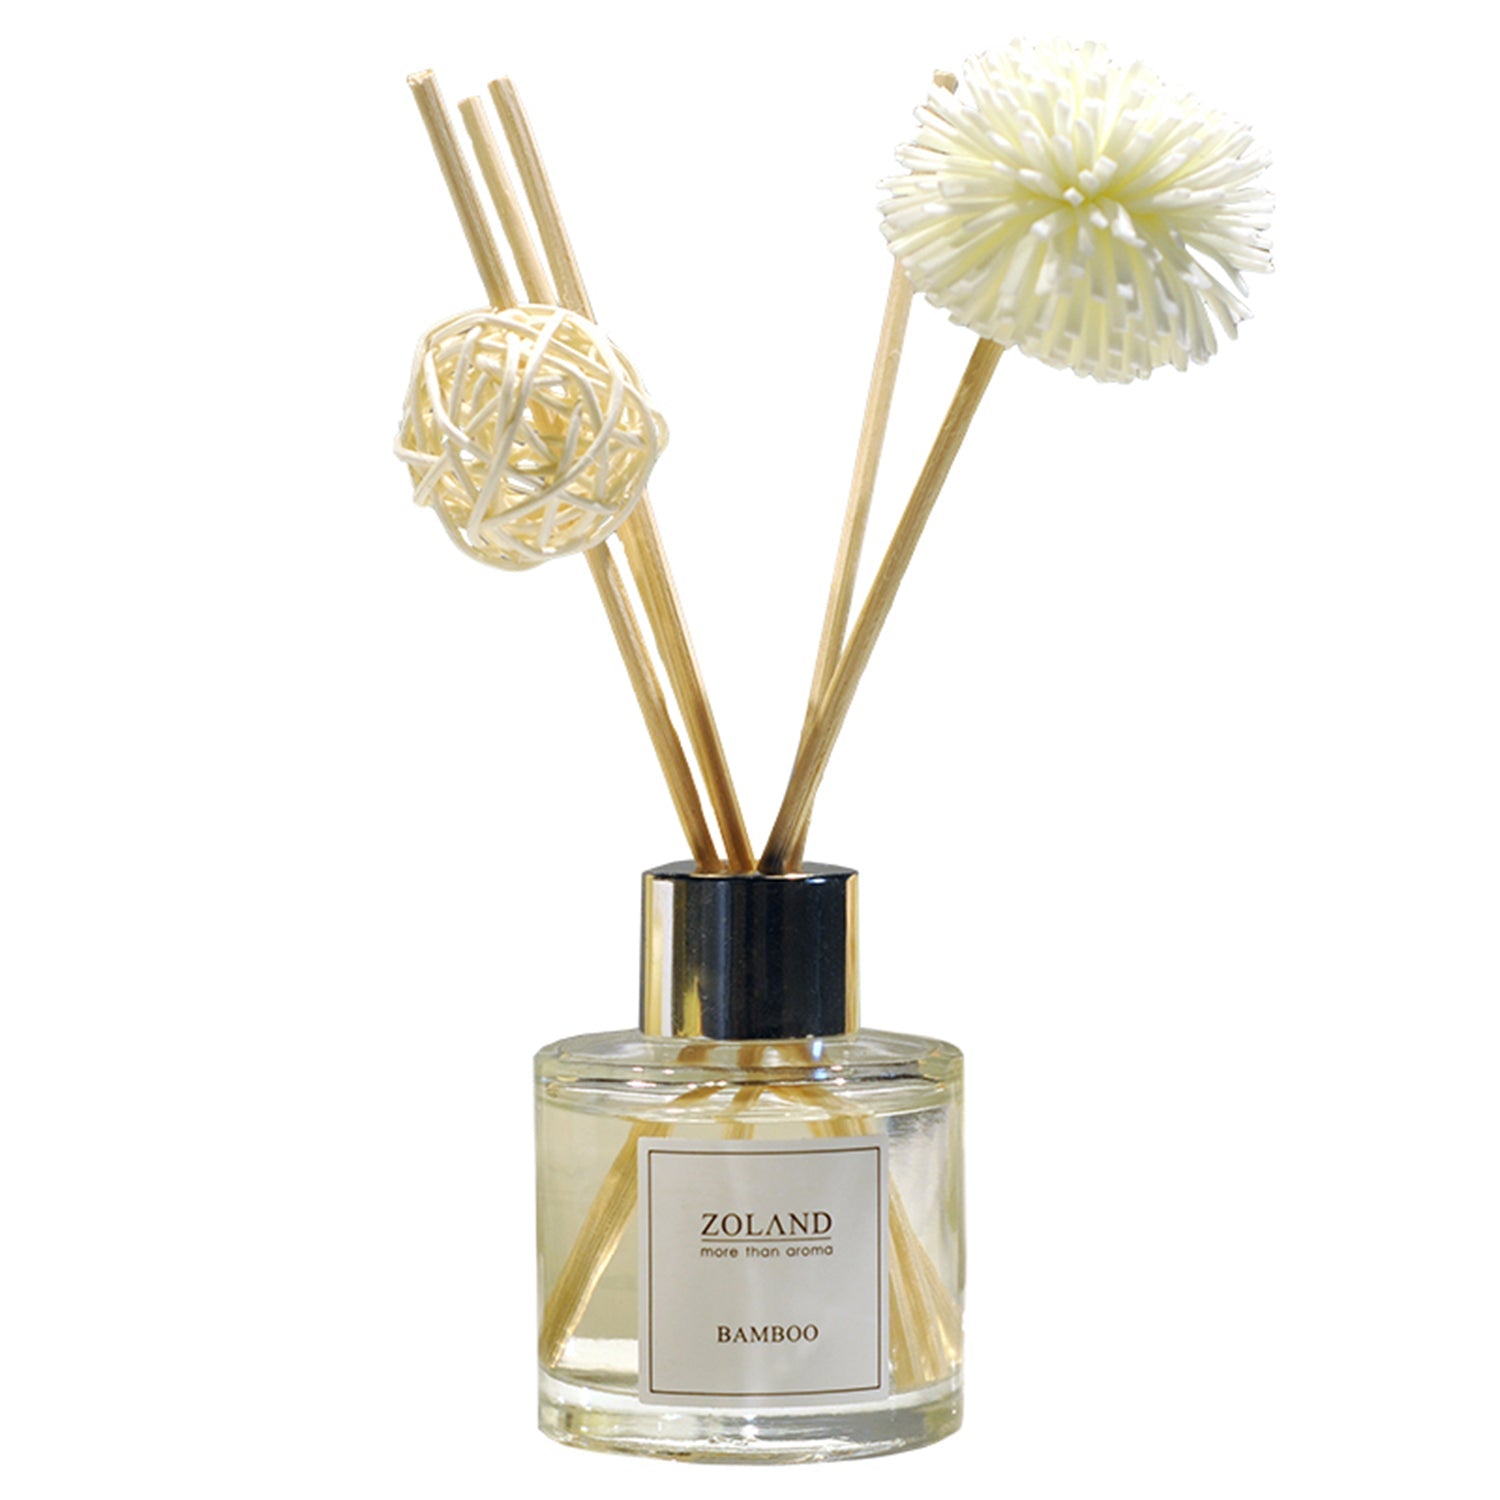 ZOLAND Reed Diffuser 50ML Premium Essential Oil Aromatherapy Round Bottle with Reed Stick, Sola Flower and Rattan Ball Reed Diffuser ZOLAND Fresh Breeze 